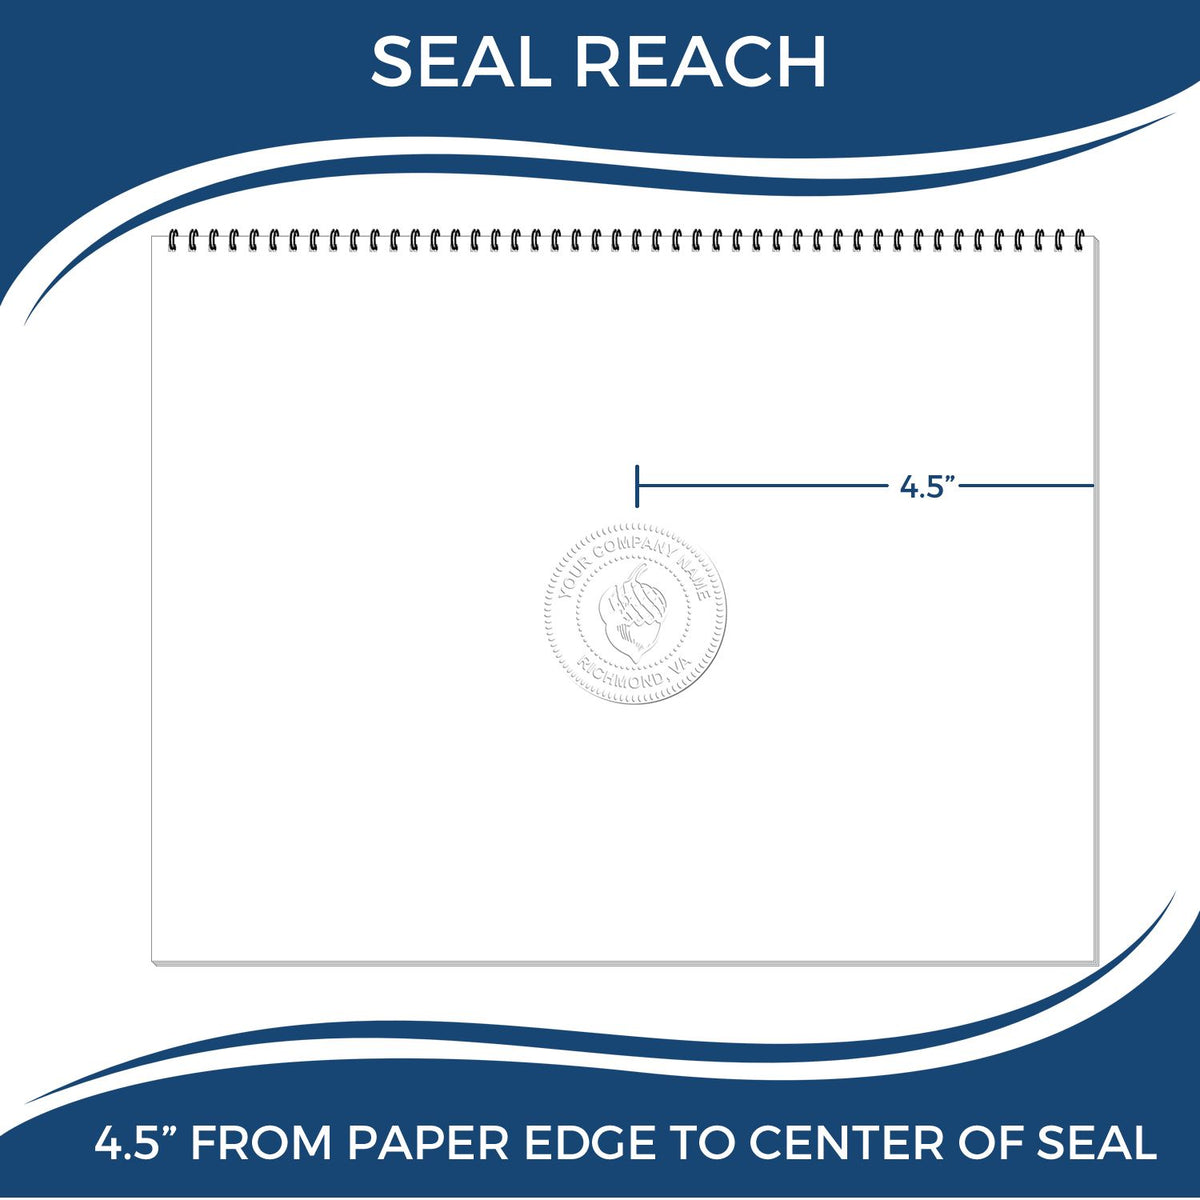 An infographic showing the seal reach which is represented by a ruler and a miniature seal image of the State of West Virginia Extended Long Reach Geologist Seal